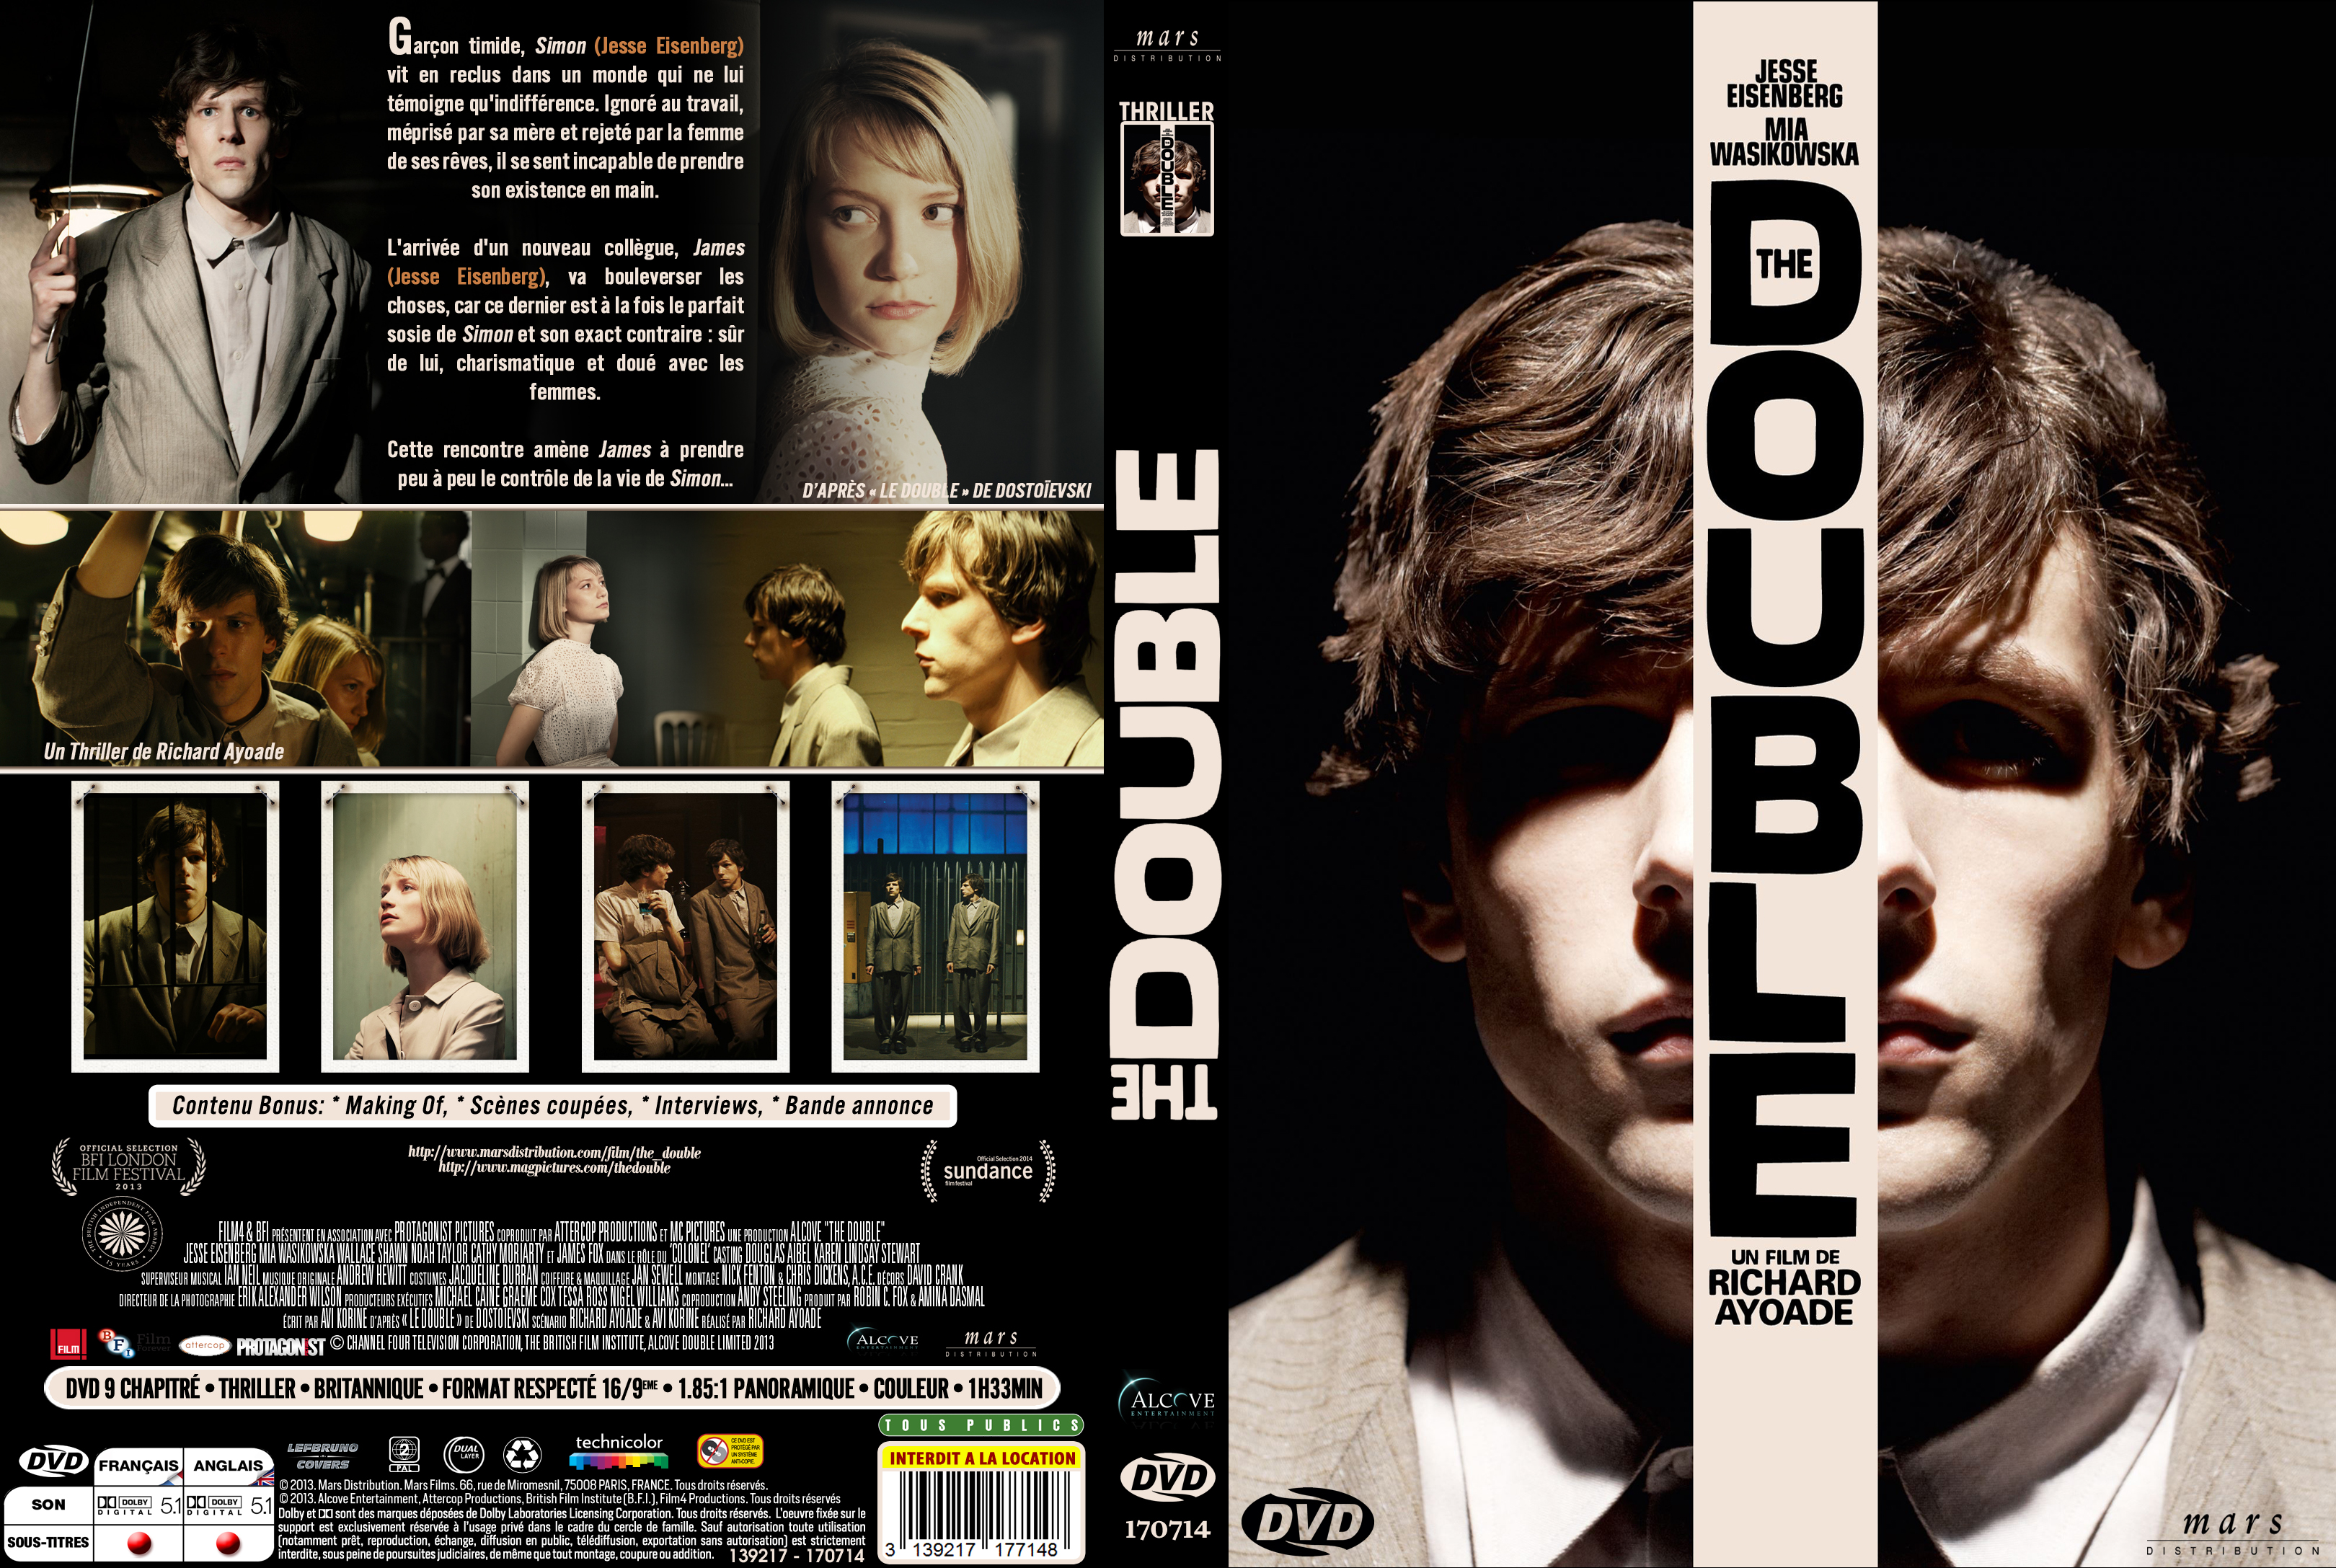 Jaquette DVD The Double custom